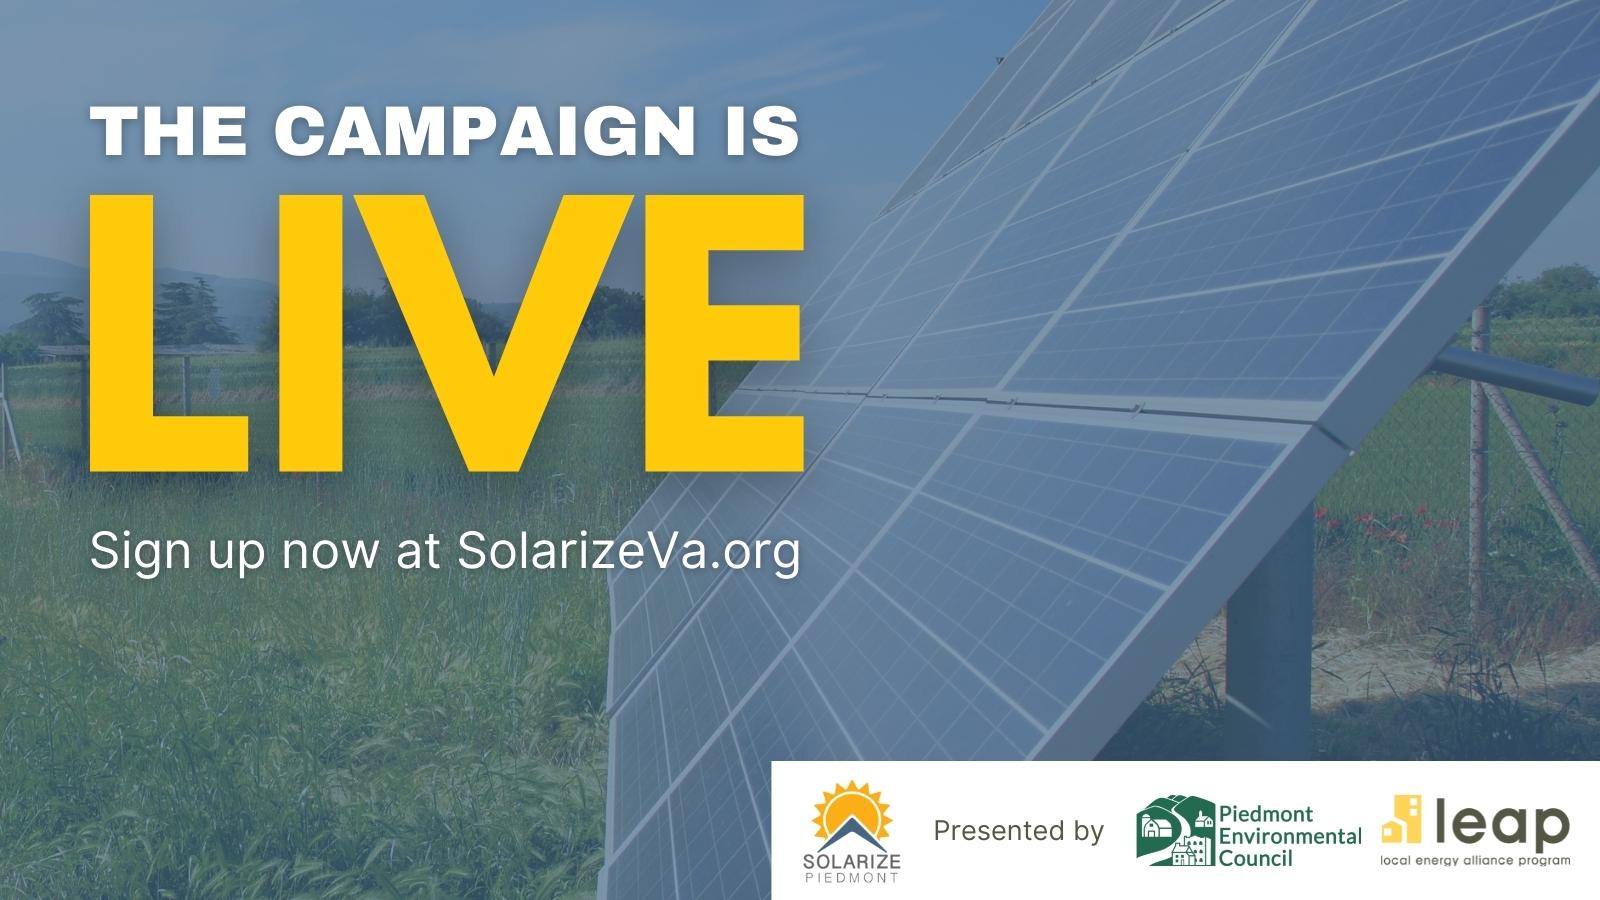 image of ground solar system on a farm with white and yellow text overlayed that says "The campaign is LIVE. Sign up at SolarizeVa.org"